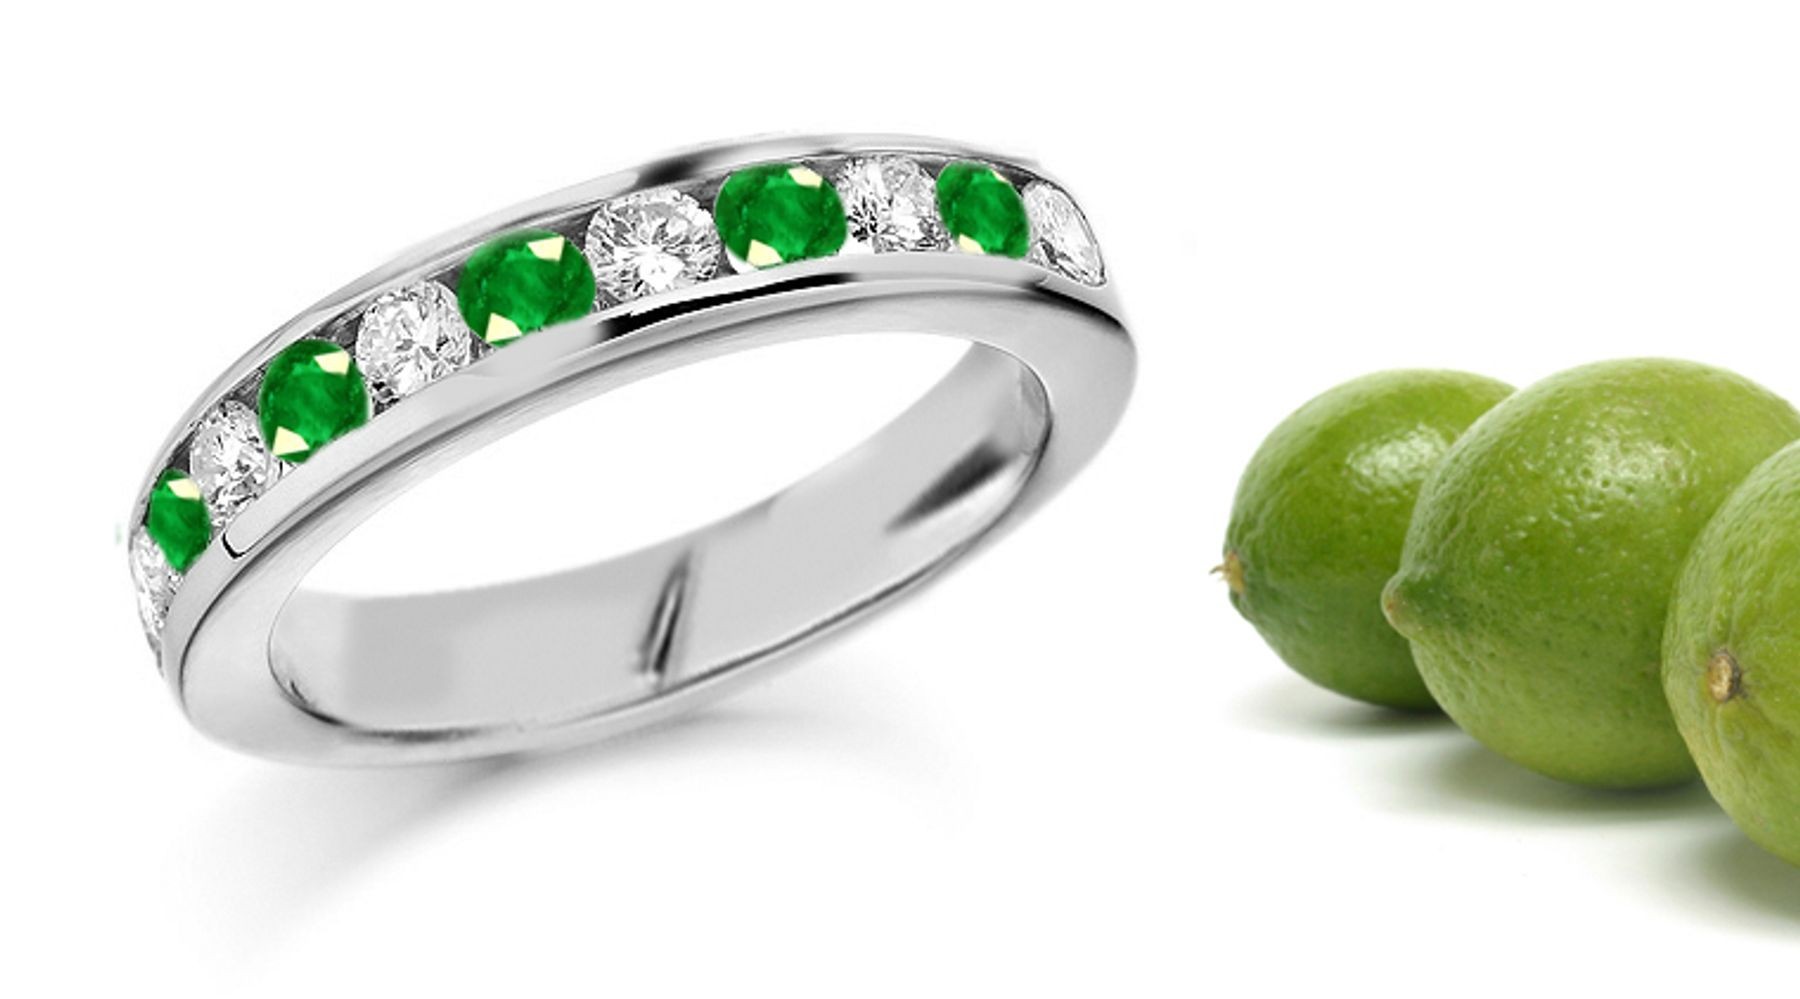 A Perfect Love Story: 11 Stone Emerald & Diamond Band in Gold